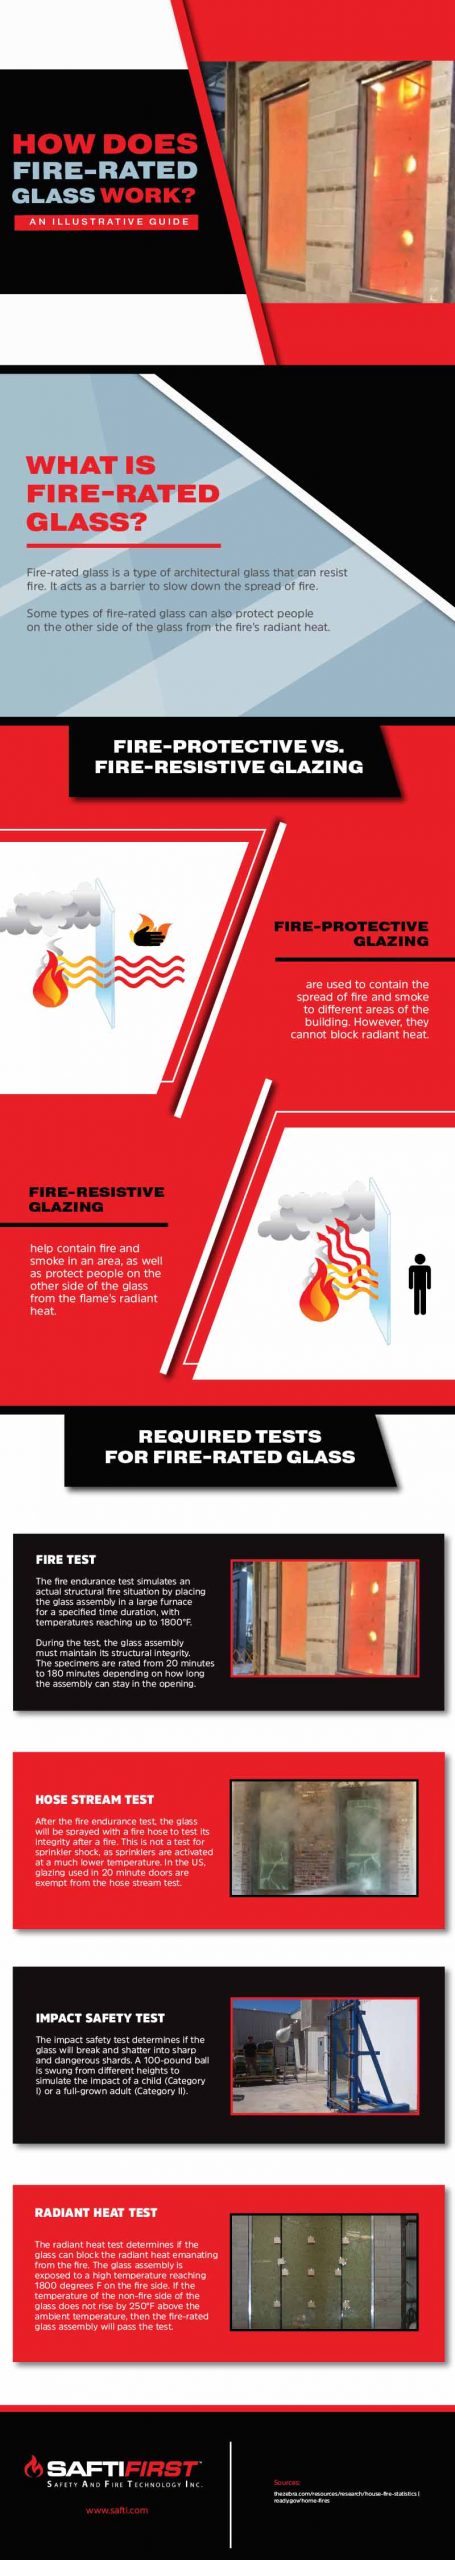 How Does Fire Rated Glass Work Infographic Scaled, Industry Today